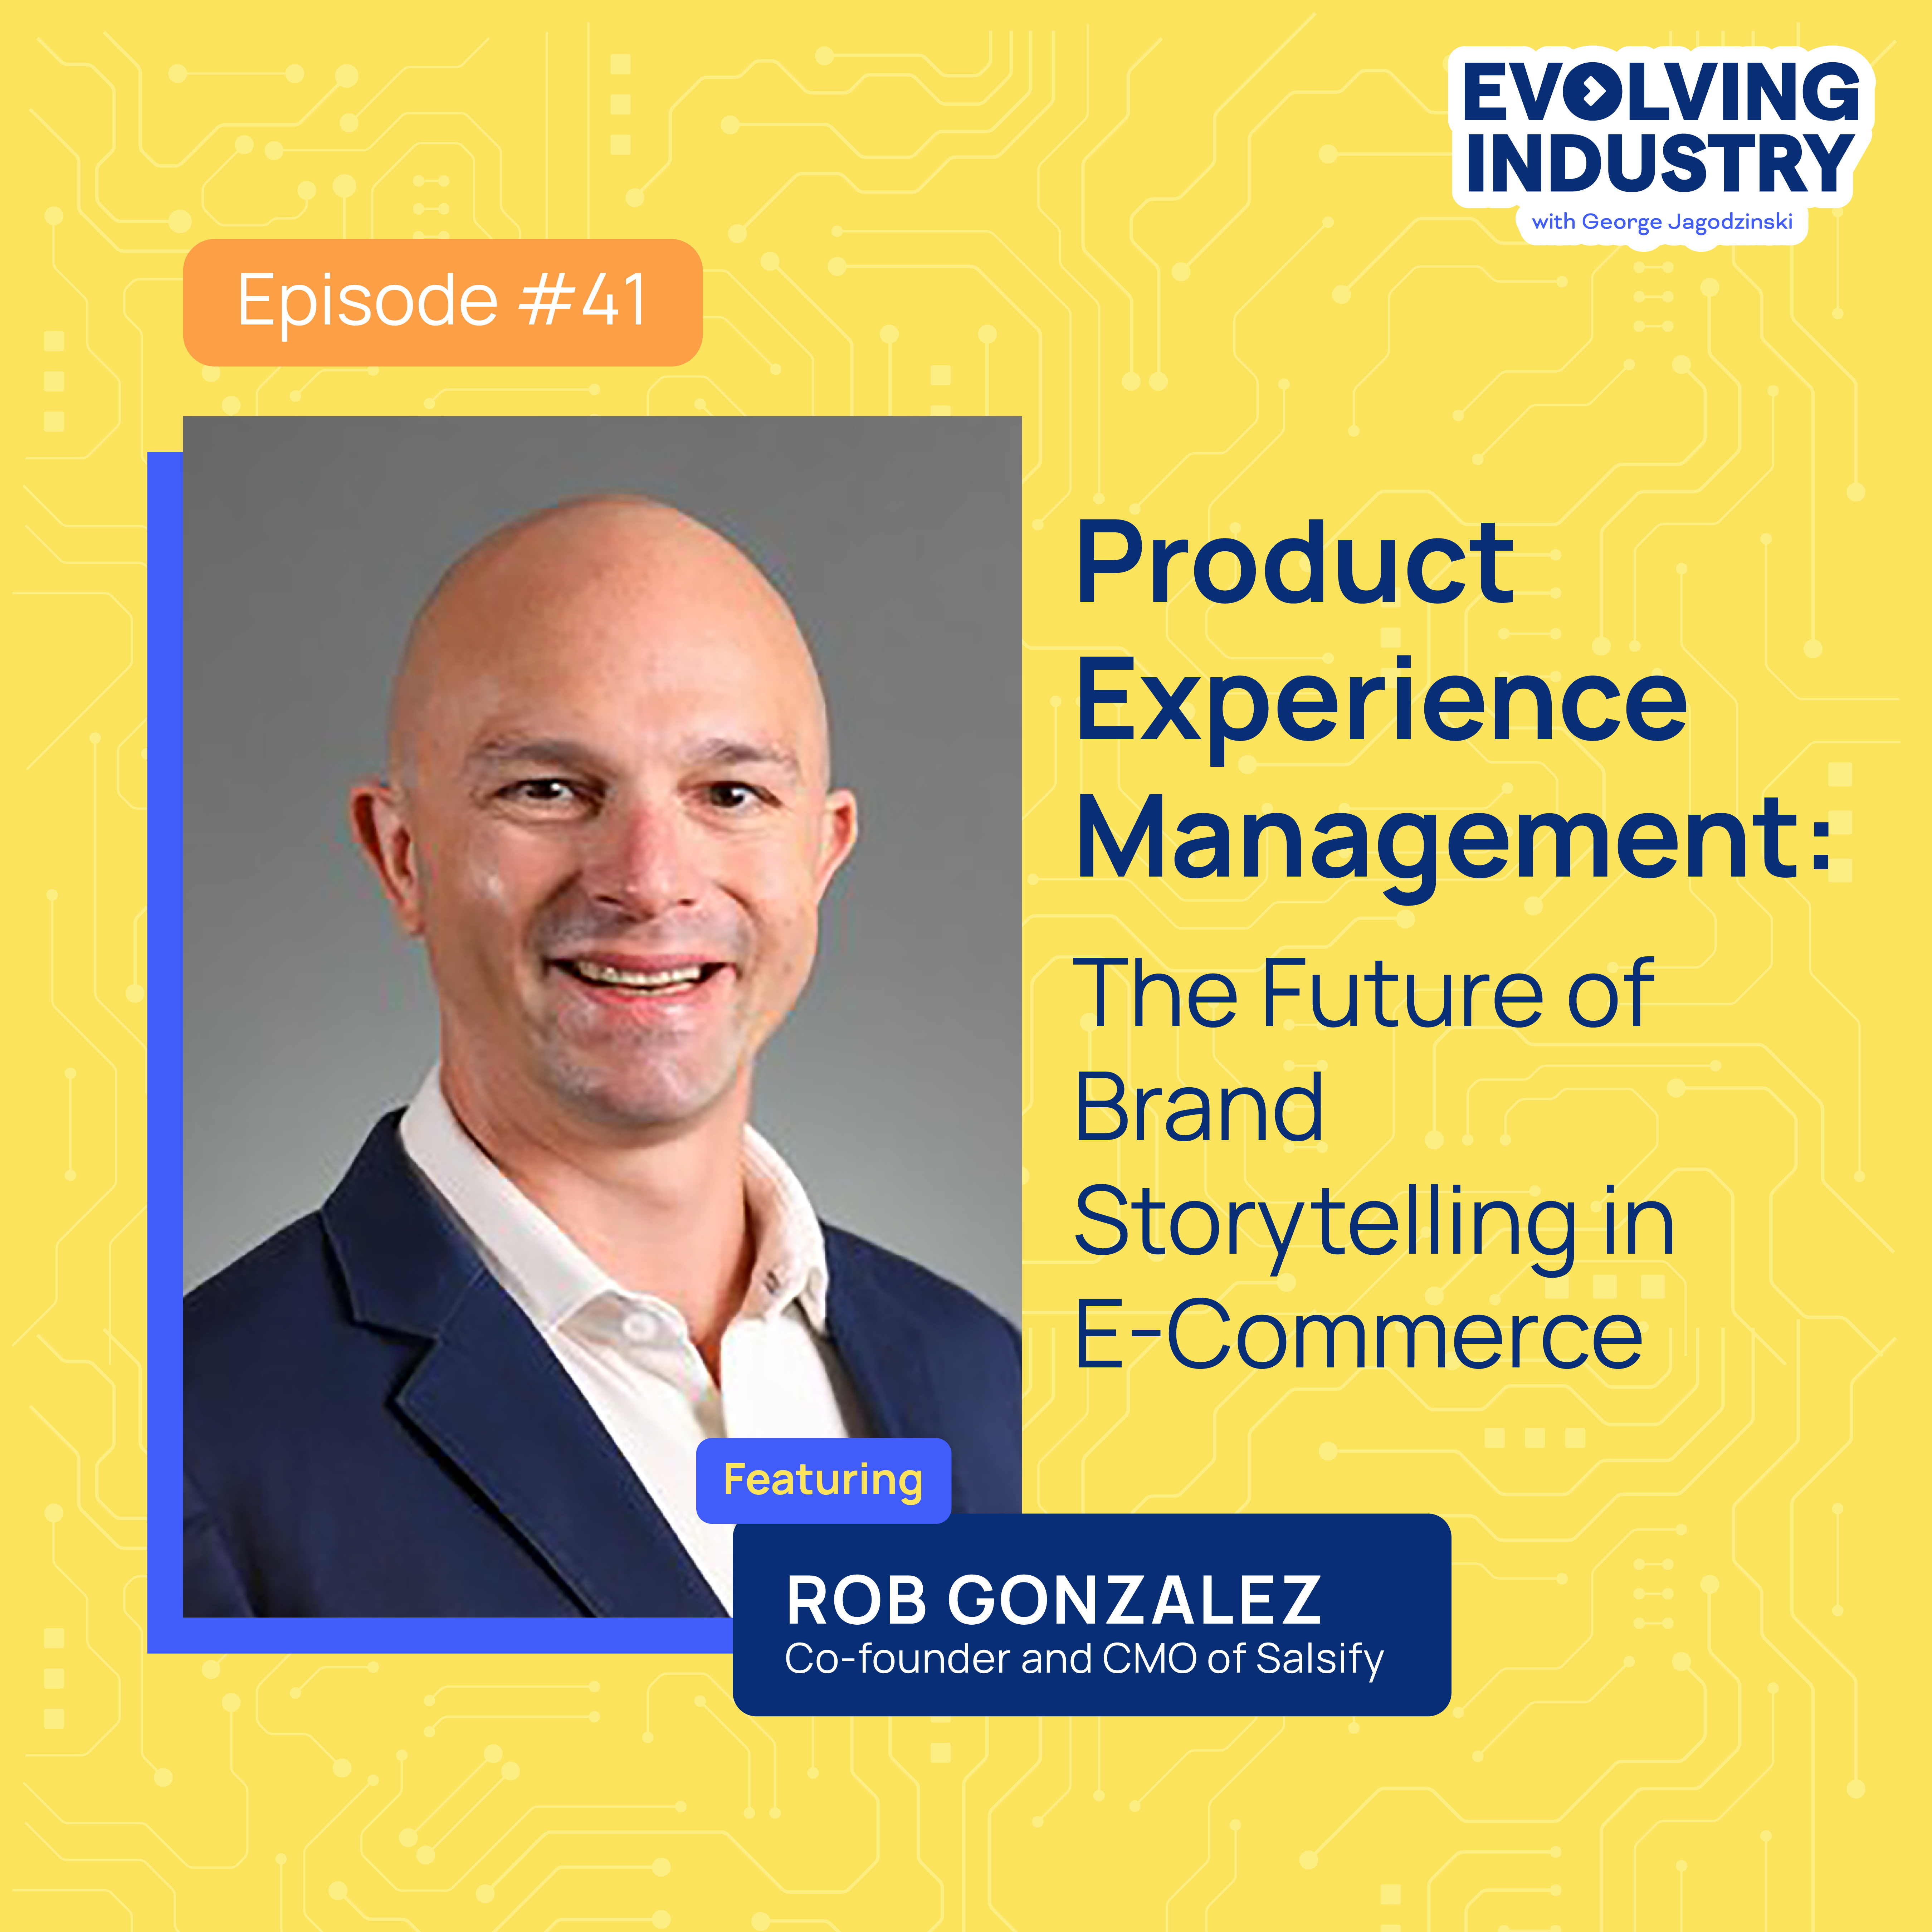 Product Experience Management: The Future of Brand Storytelling in E-Commerce